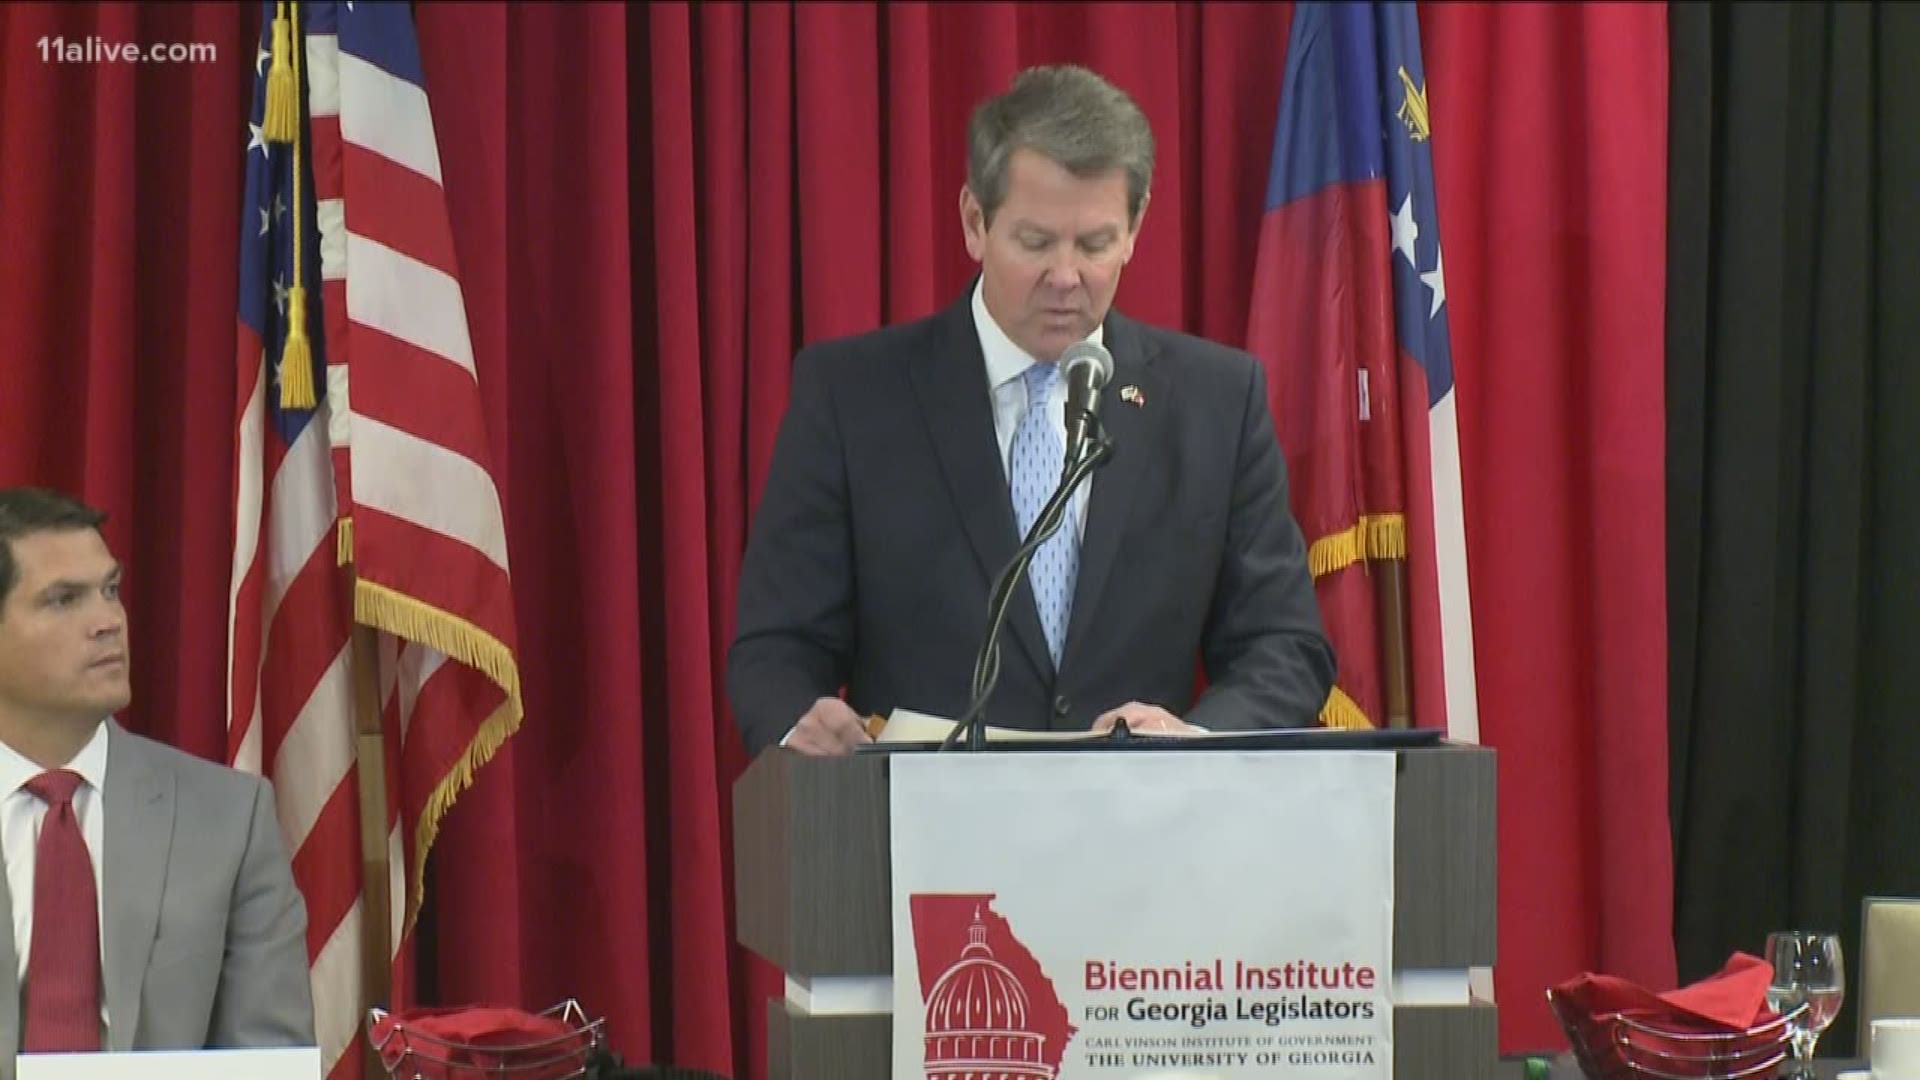 Georgia’s governor-elect Brian Kemp promised to bolster law enforcement, grow small business and more in his first major speech to legislators.